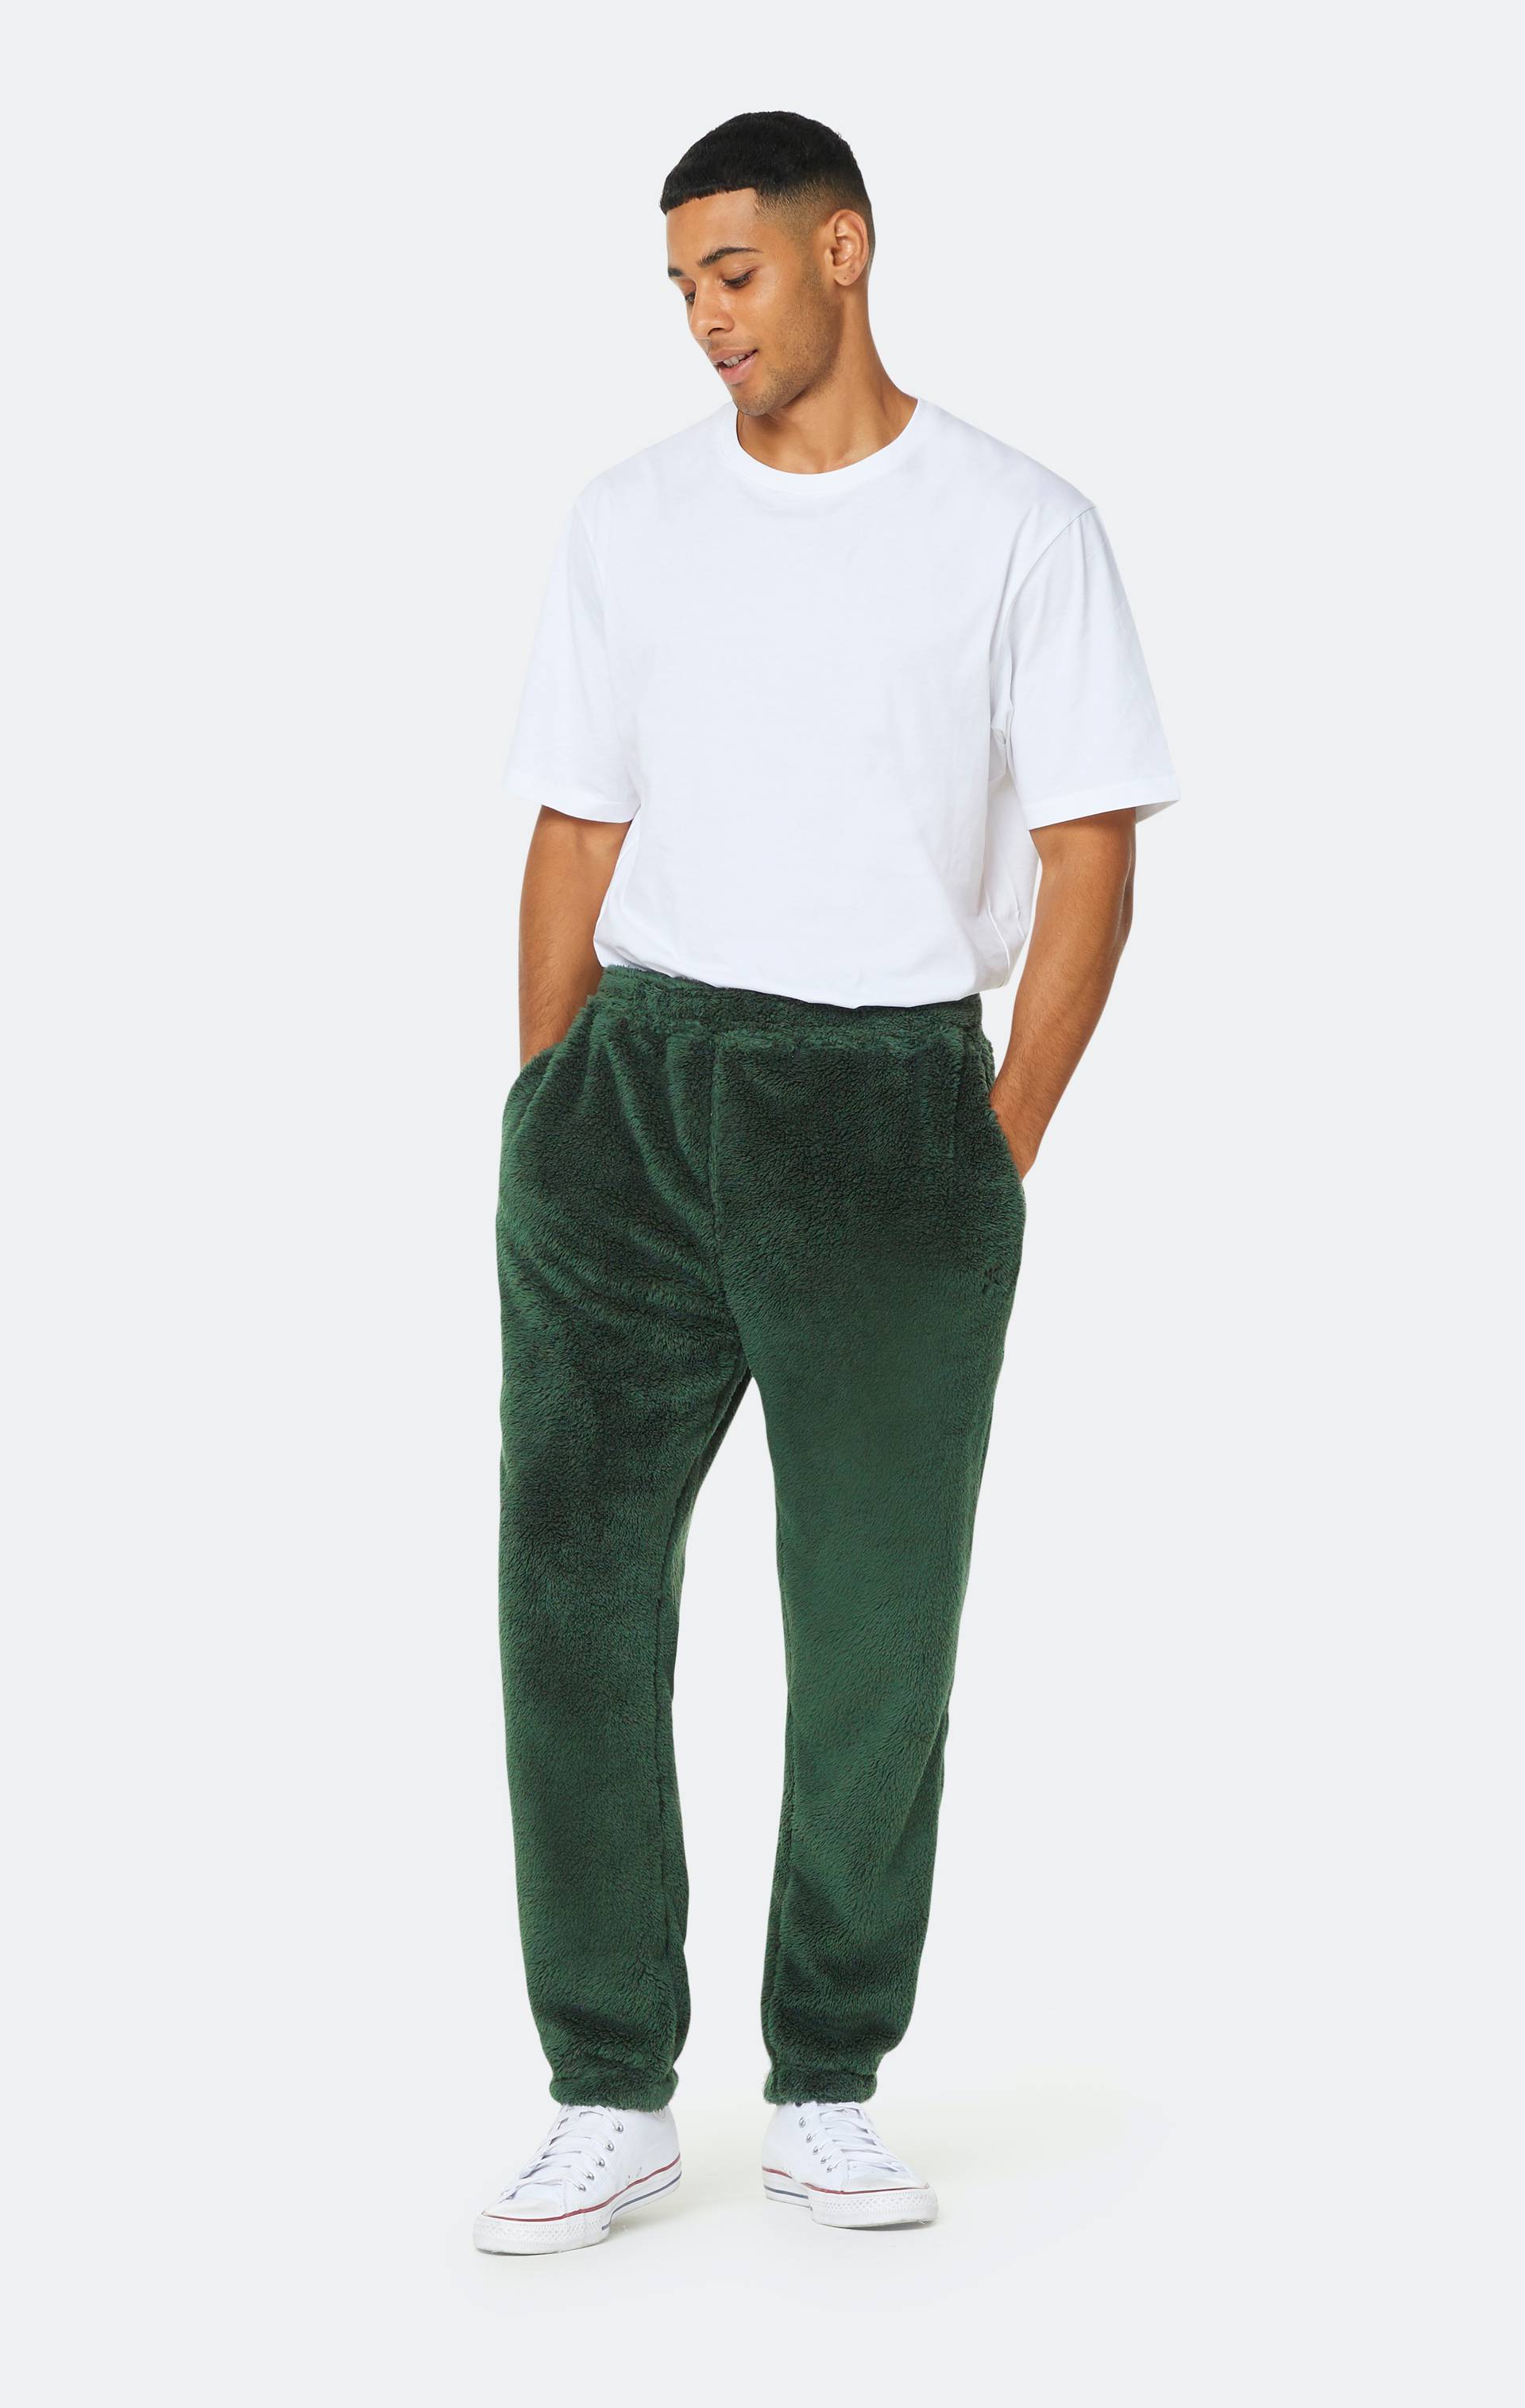 Onepiece The Puppy Pant Green - 2